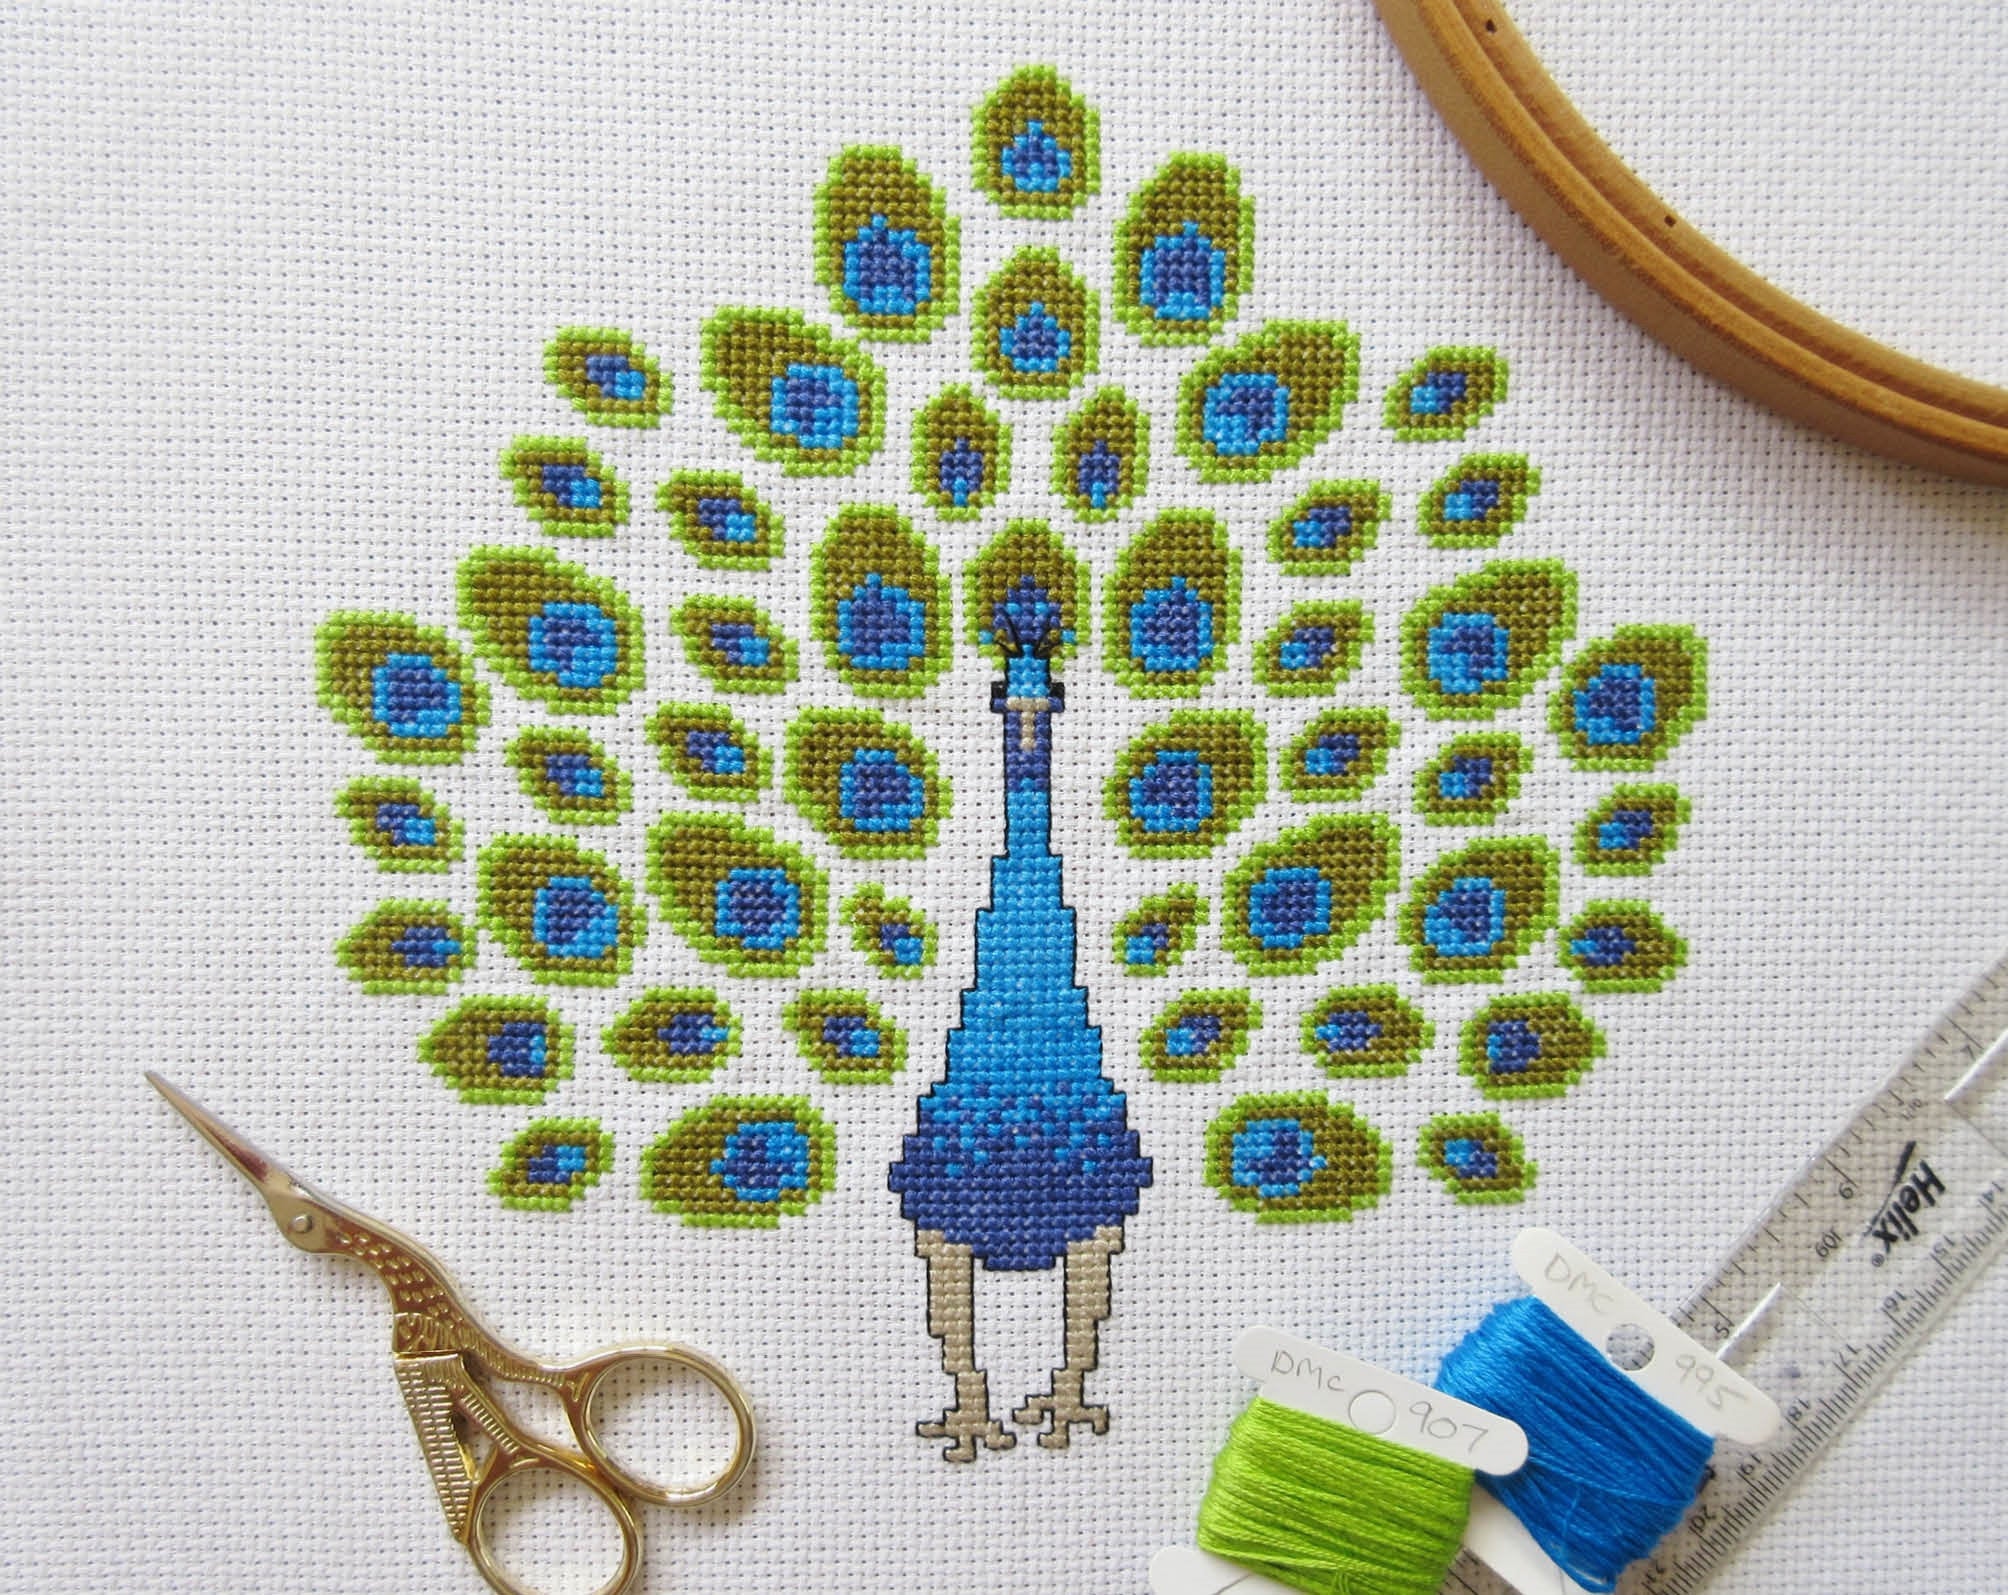 Peacock cross stitch pattern - stylised peacock with big feathers